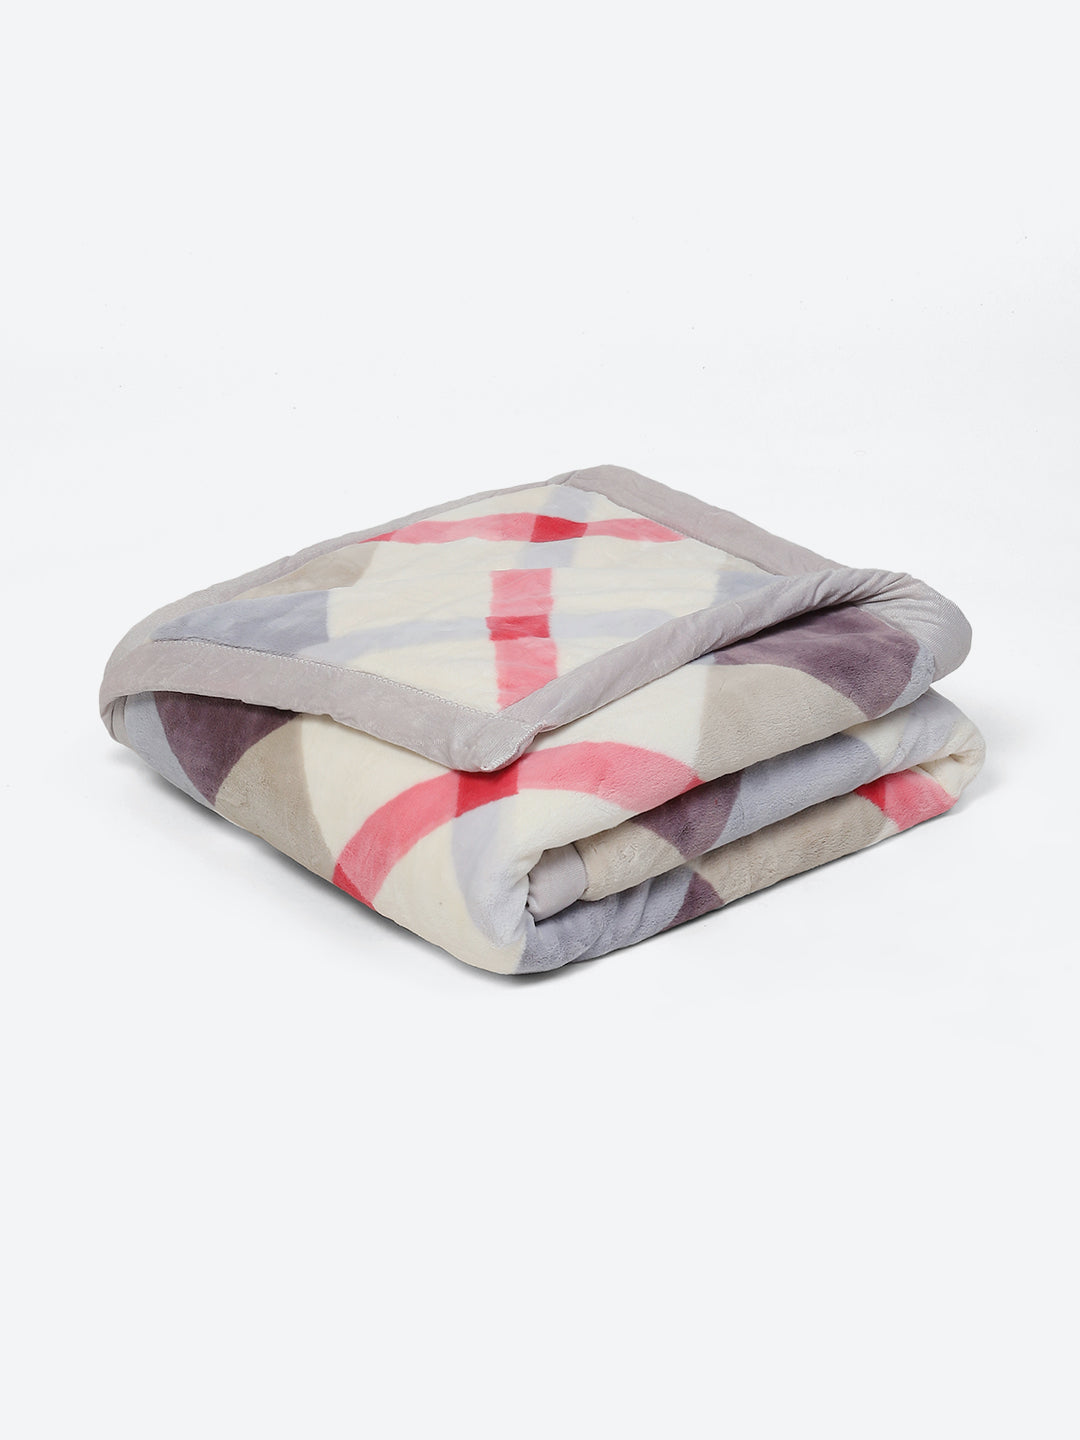 Checkered Single Bed Blanket for Mild Winter -2 Ply